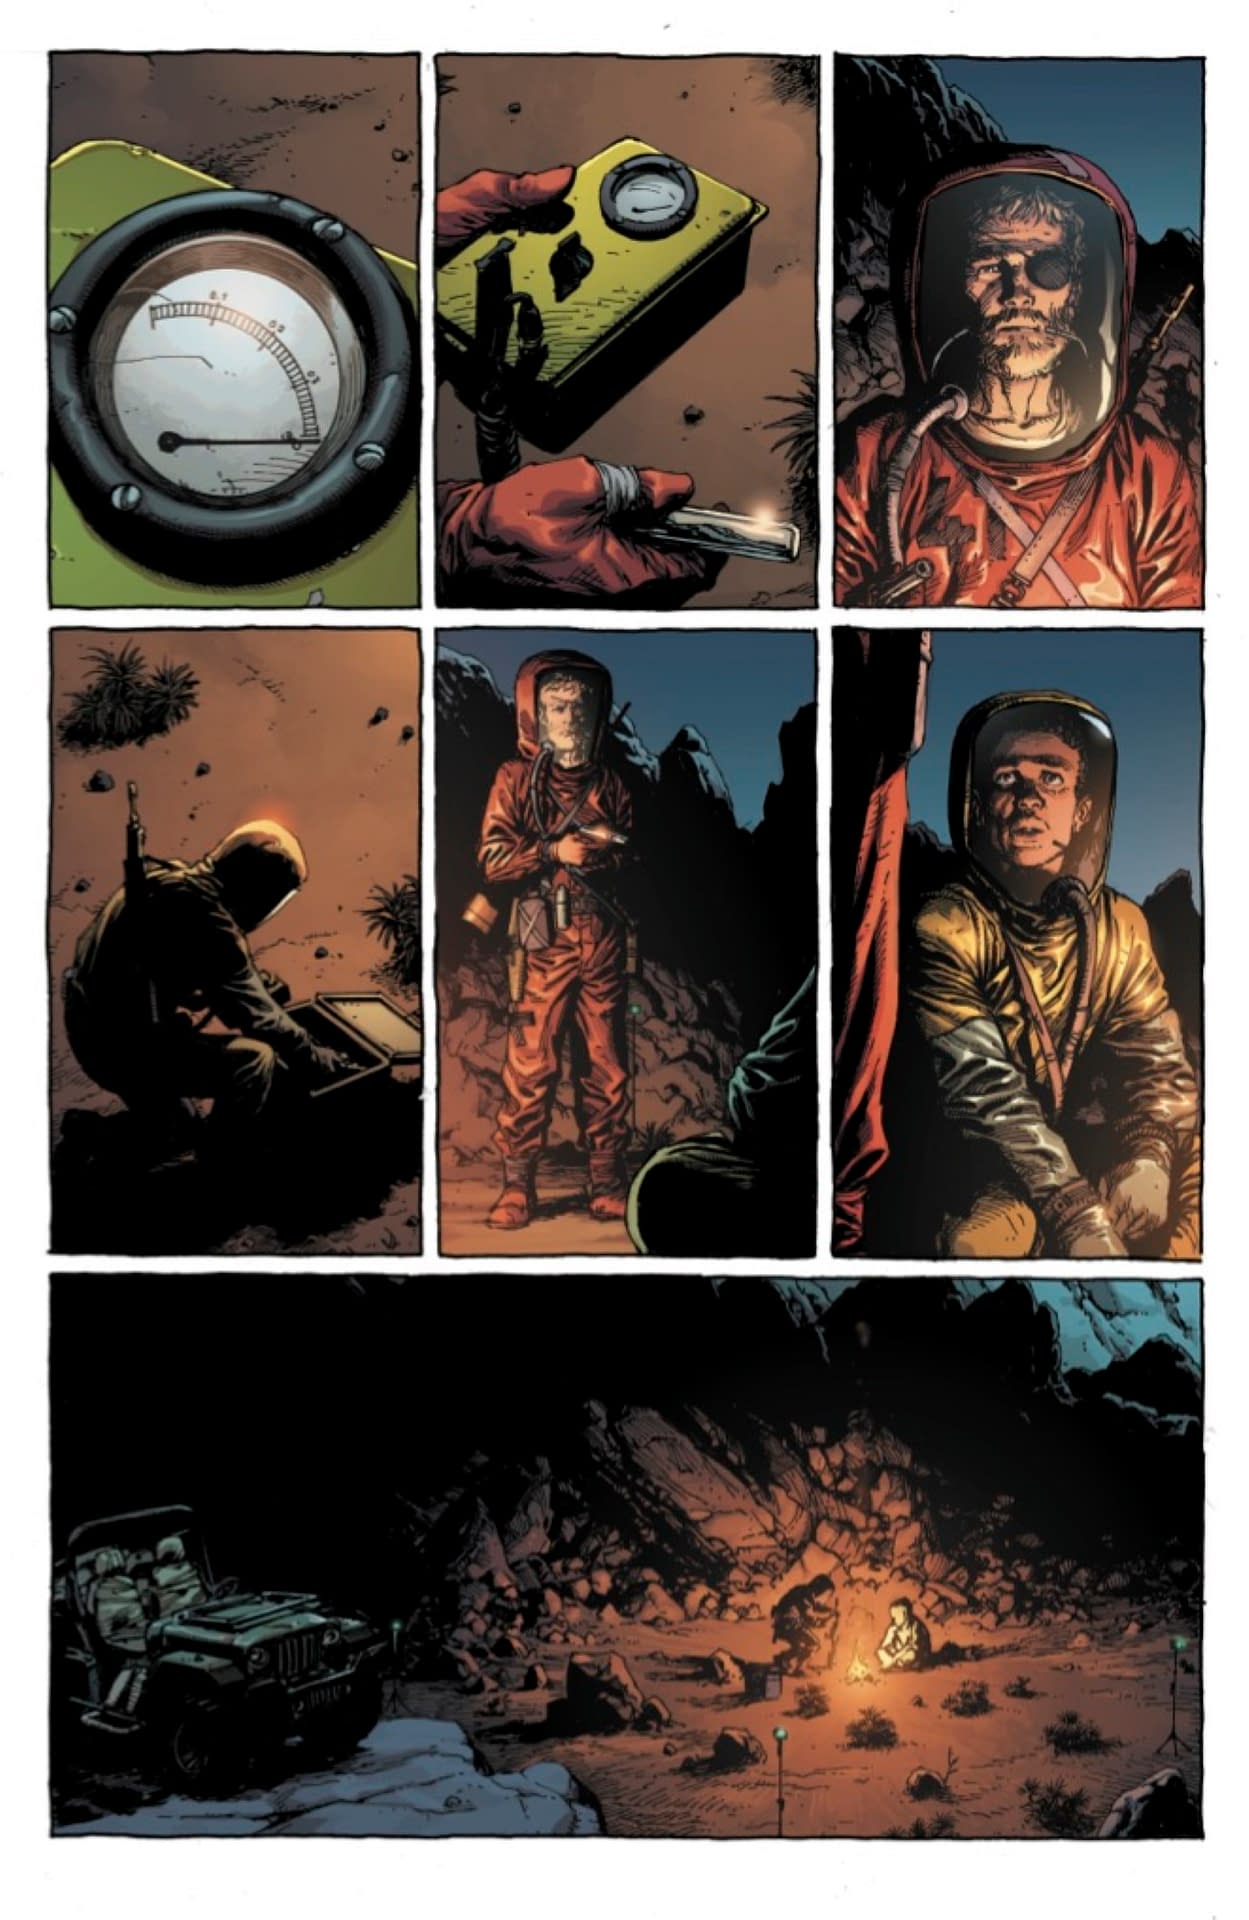 A page from Geiger #1 - featuring two people in hazmat suits sharing a campfire in the wasteland